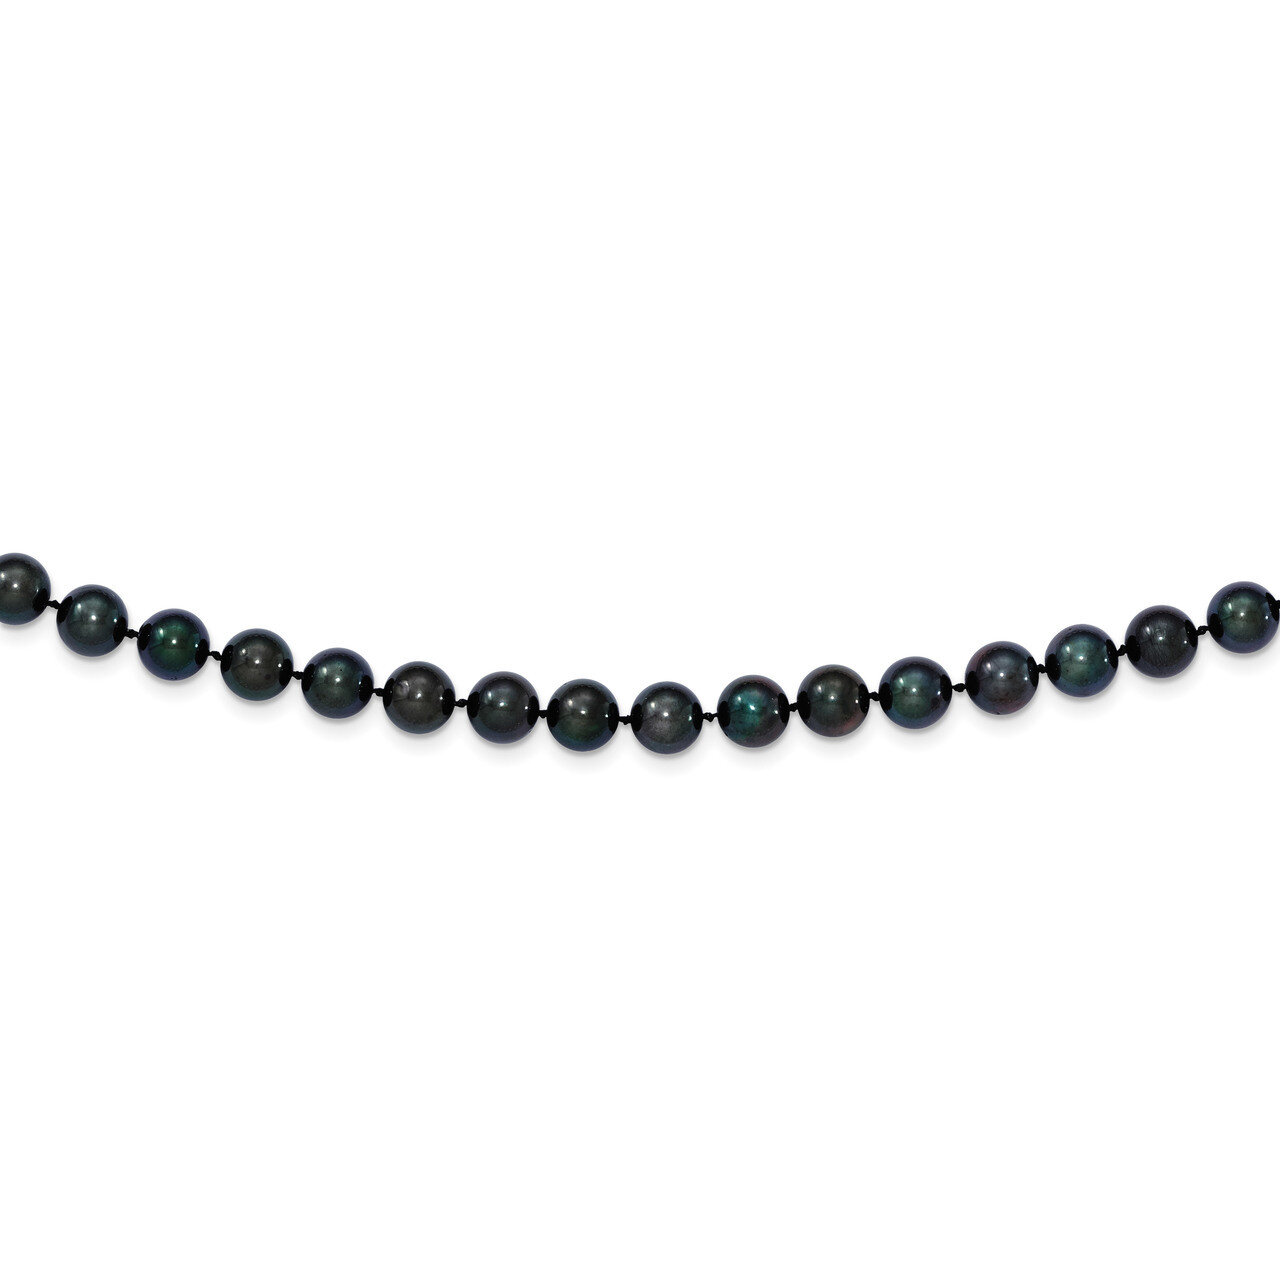 16 Inch 7-8mm Round Black Saltwater Akoya Cultured Pearl Necklace 14k white Gold PLB70-16